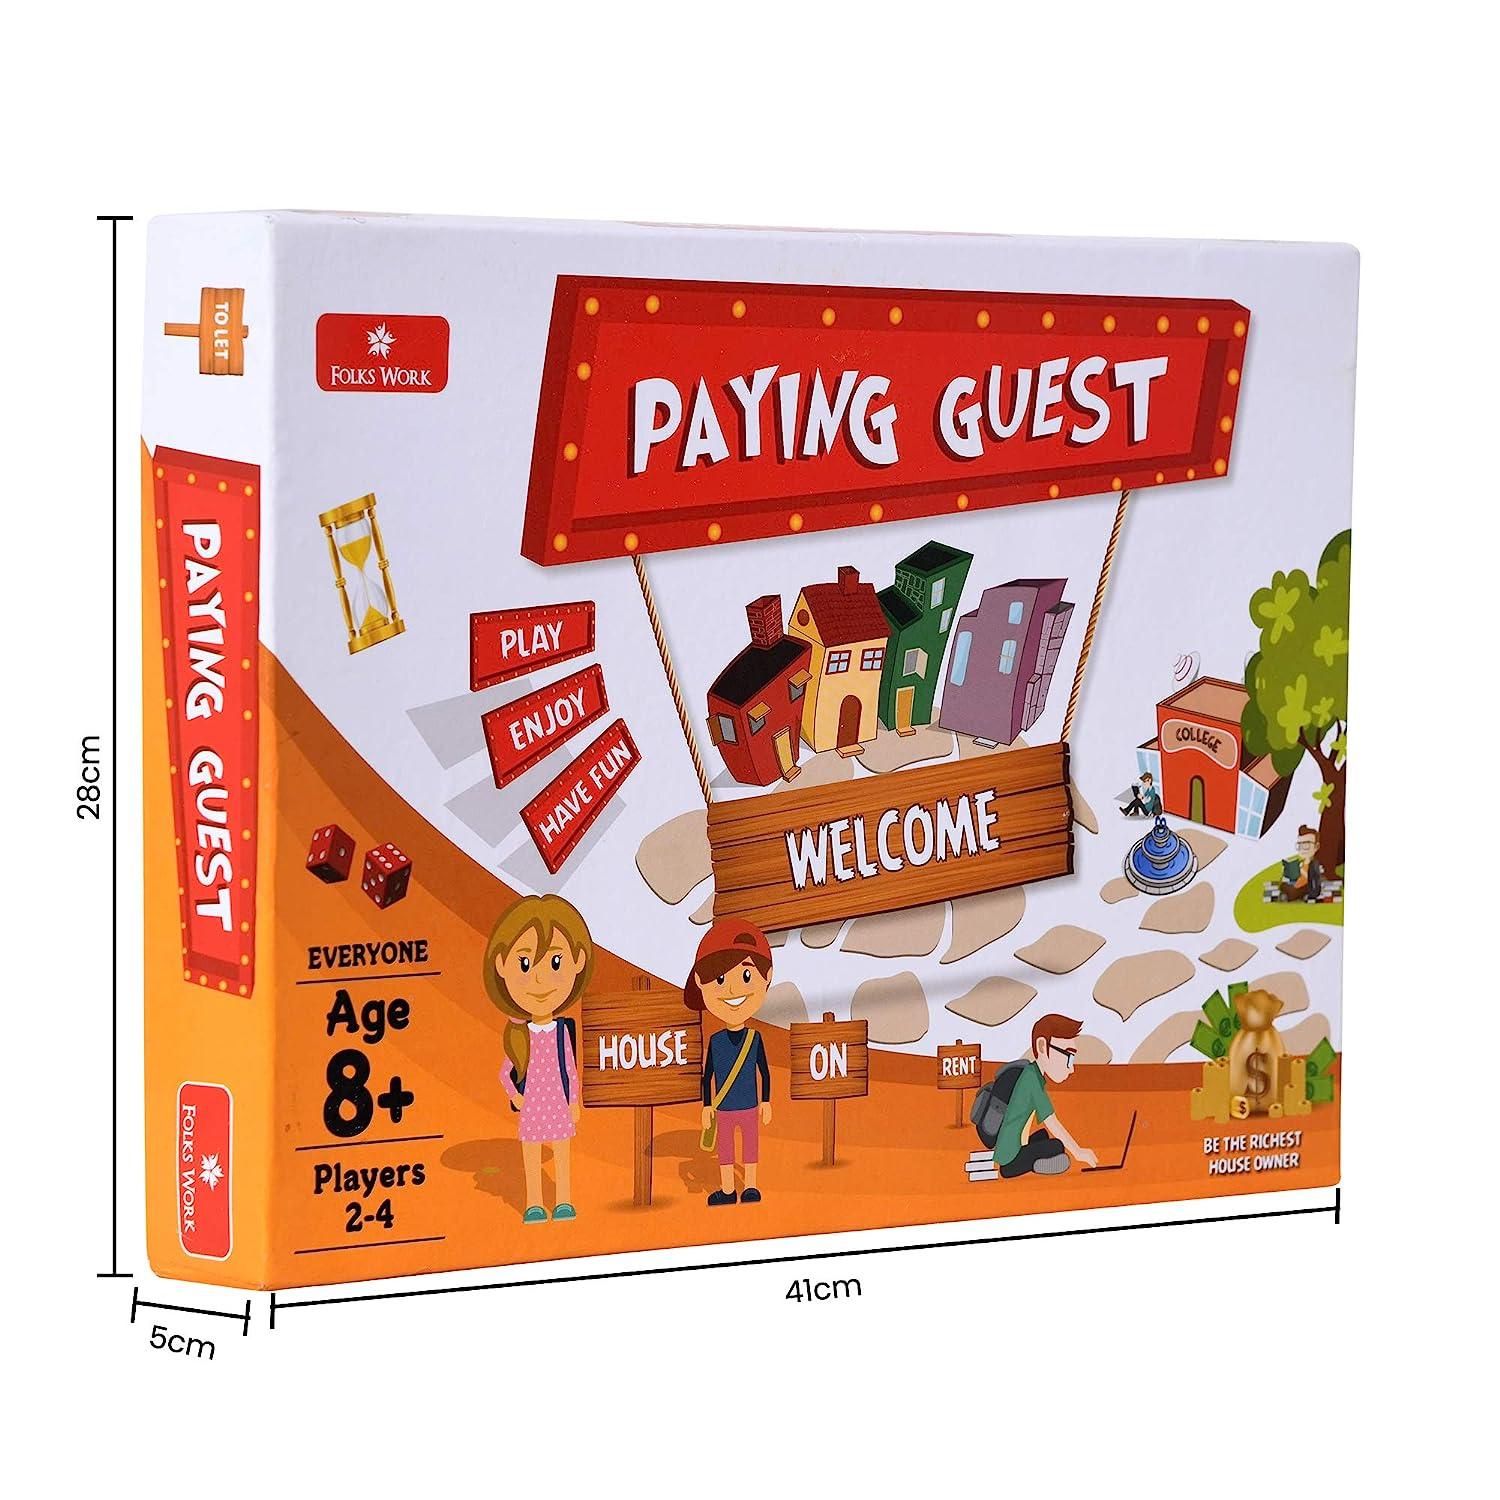 Folks Works Paying Guest Game for children